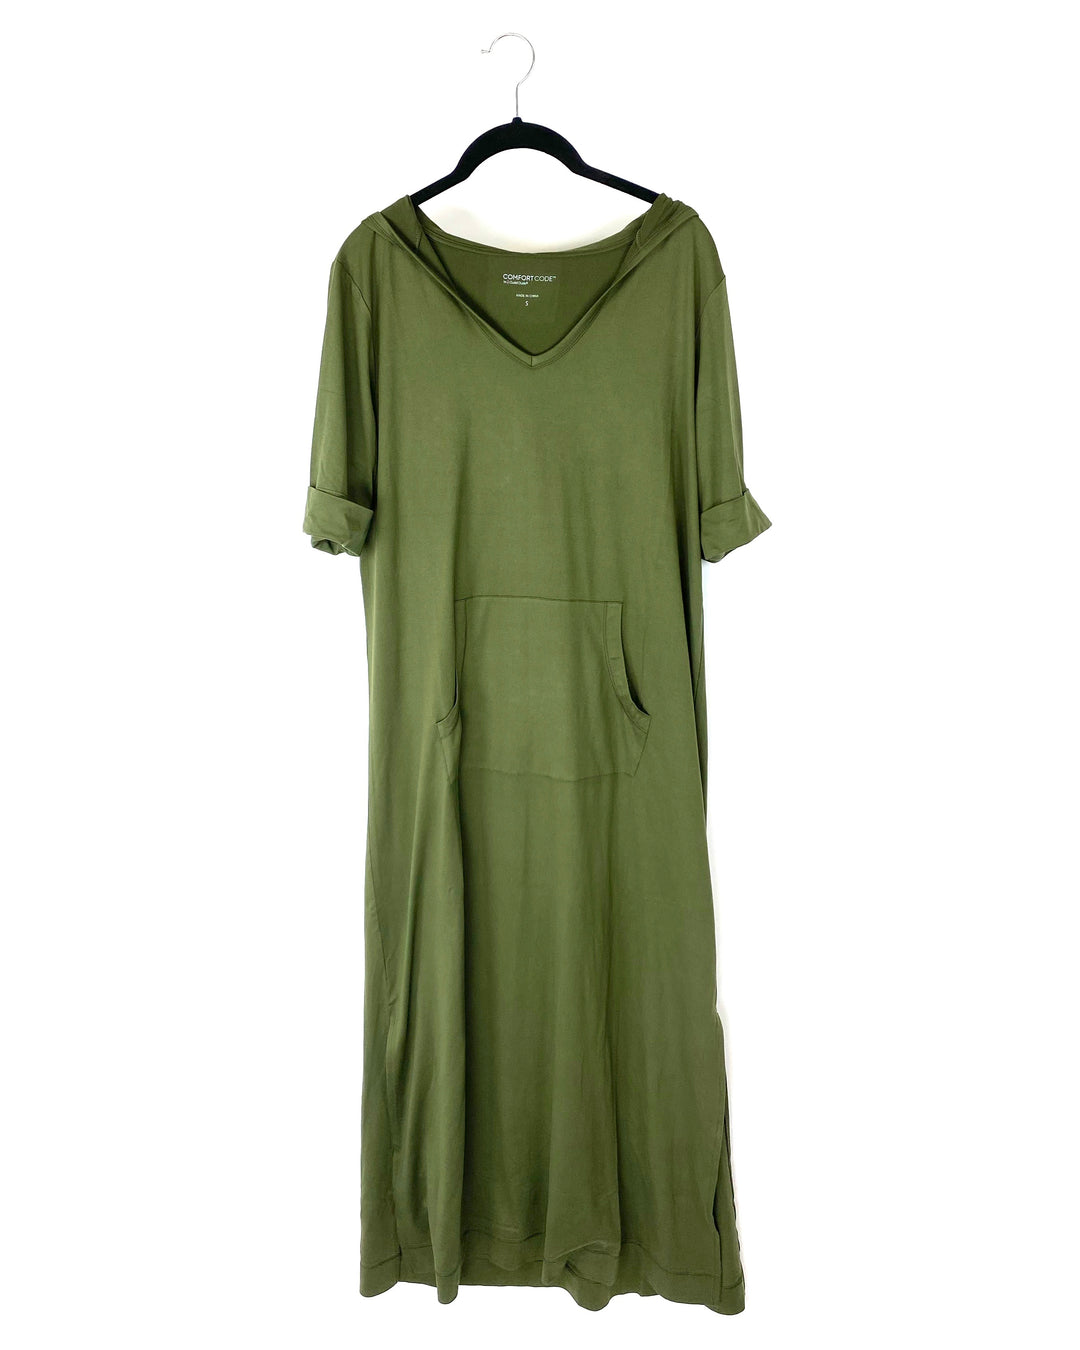 Cotton Hooded Dress - Size 6/8